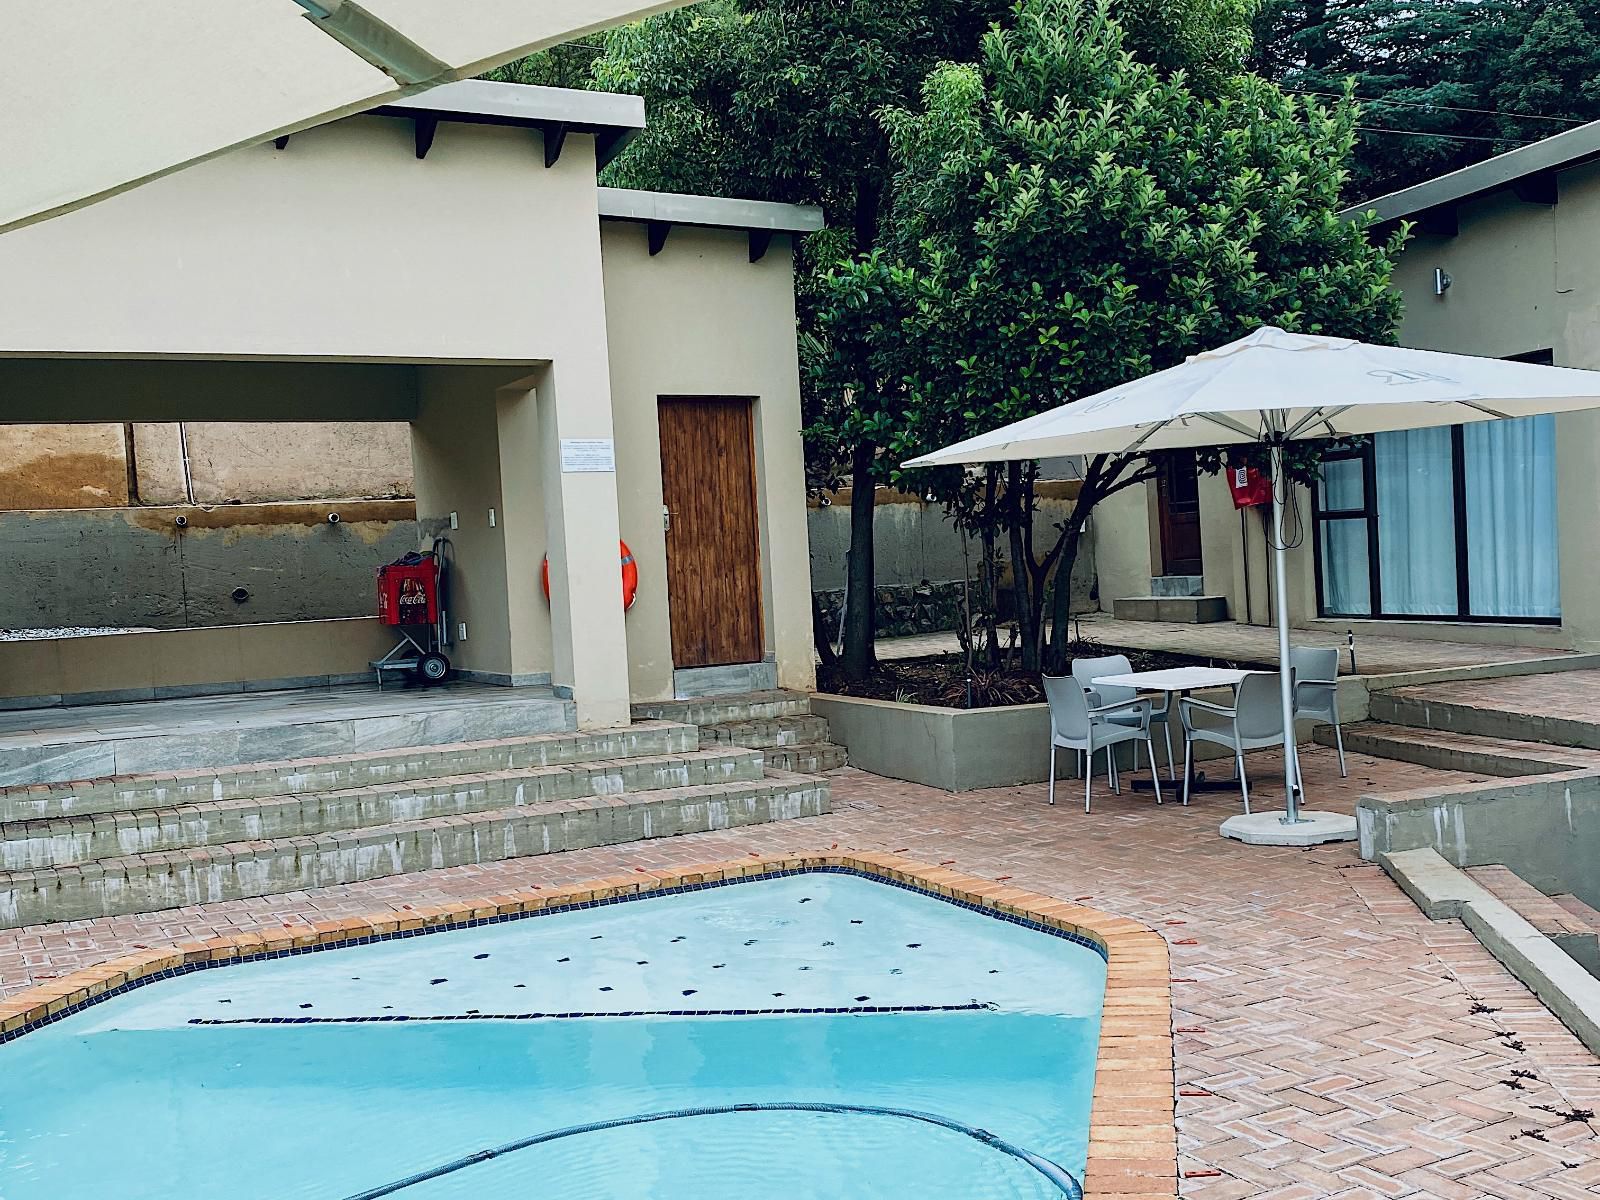 Rnb Boutique Guesthouse Roodekrans Johannesburg Gauteng South Africa Swimming Pool